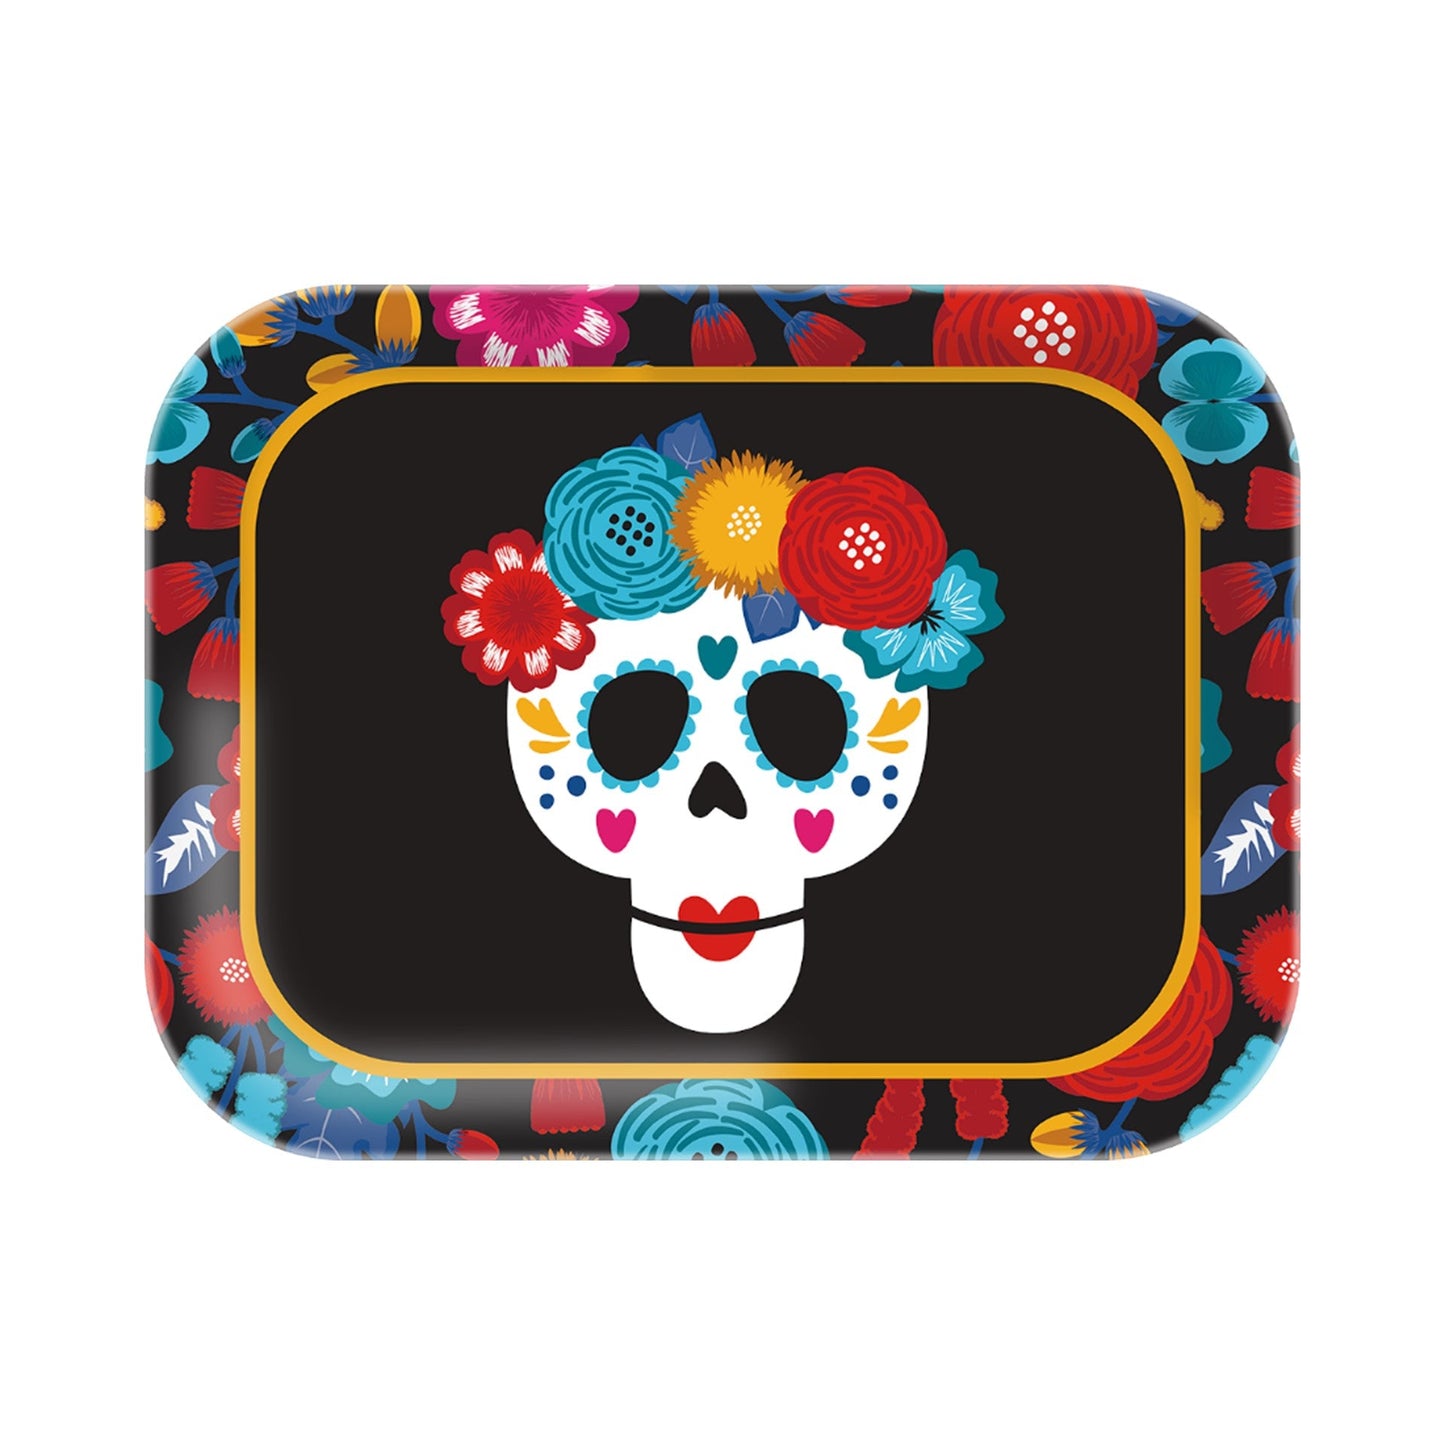 15.12in Melamine Rectangular Tray - Day Of The Dead Floral